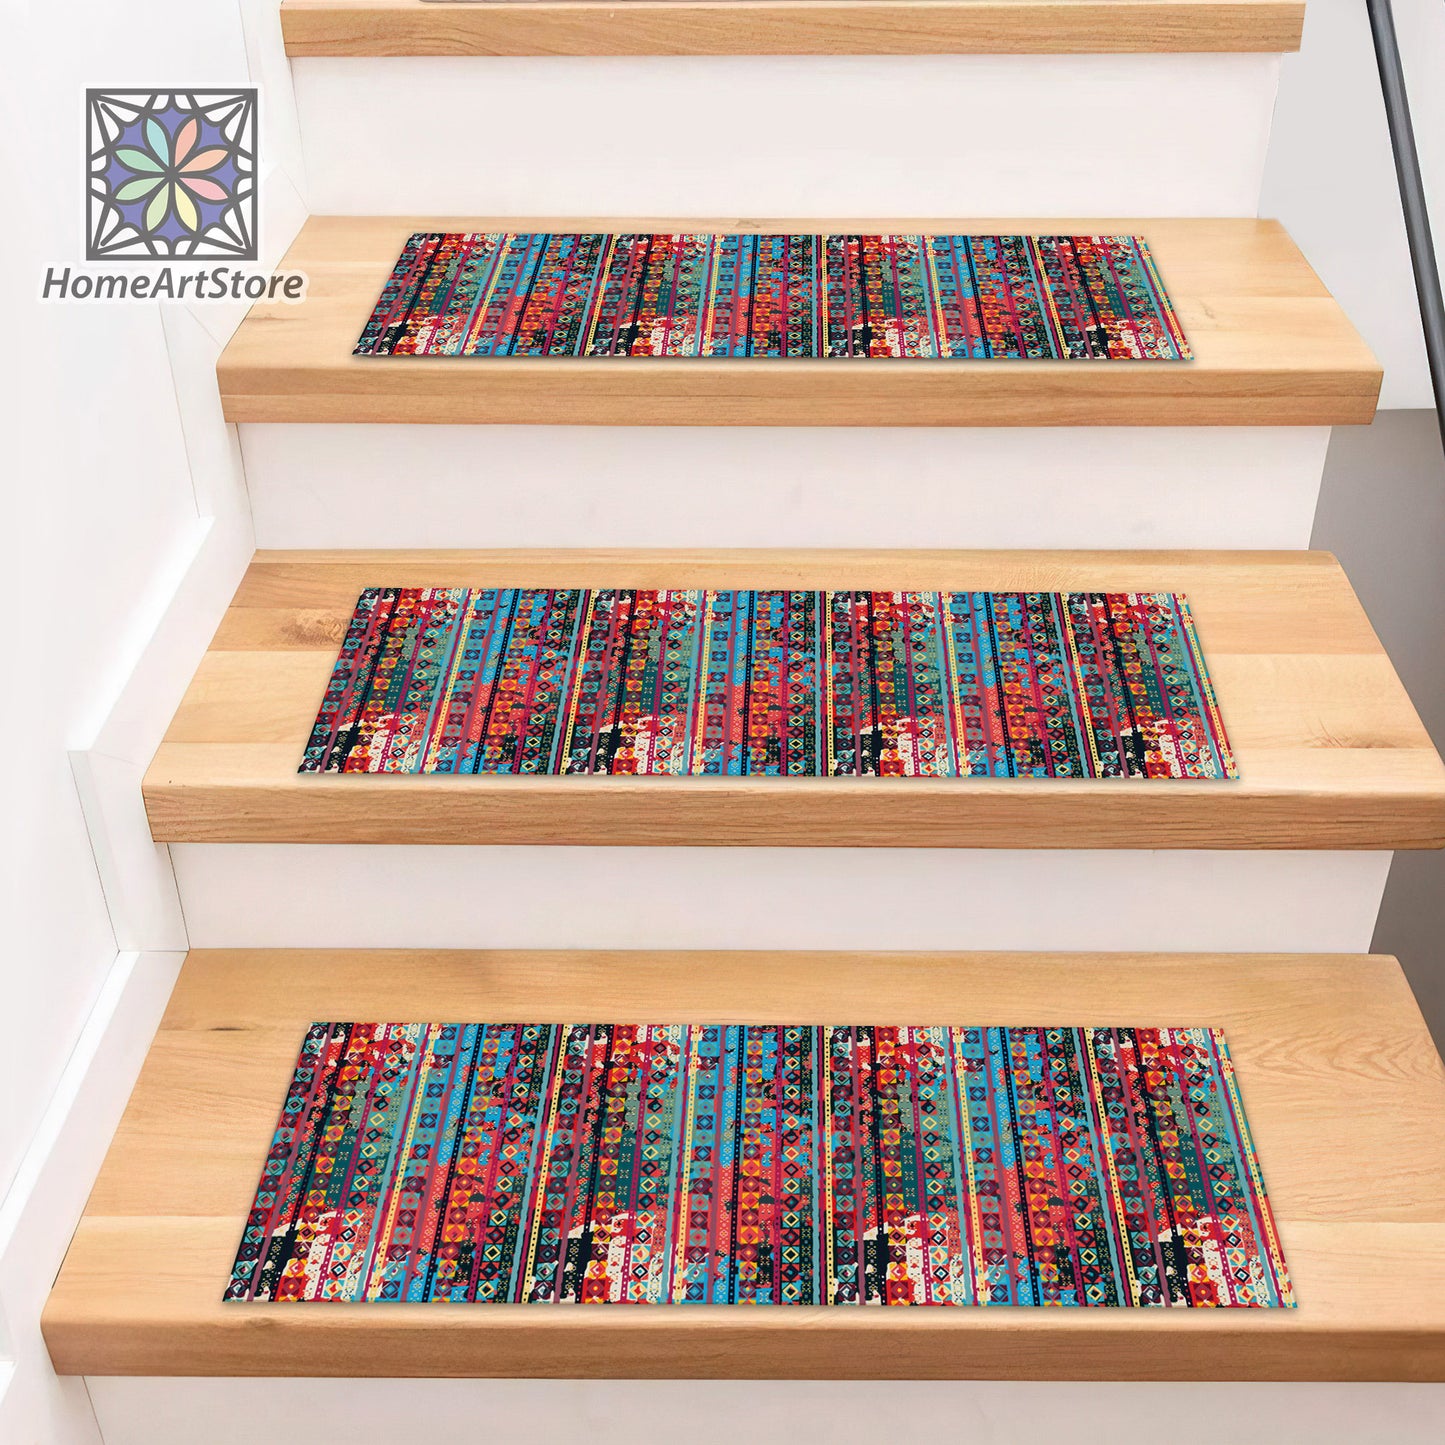 Patchwork Themed Stair Rugs, Boho Style Step Mats, Ethnic Stair Carpet, Colorful Geometric Pattern Stair Tread Rugs